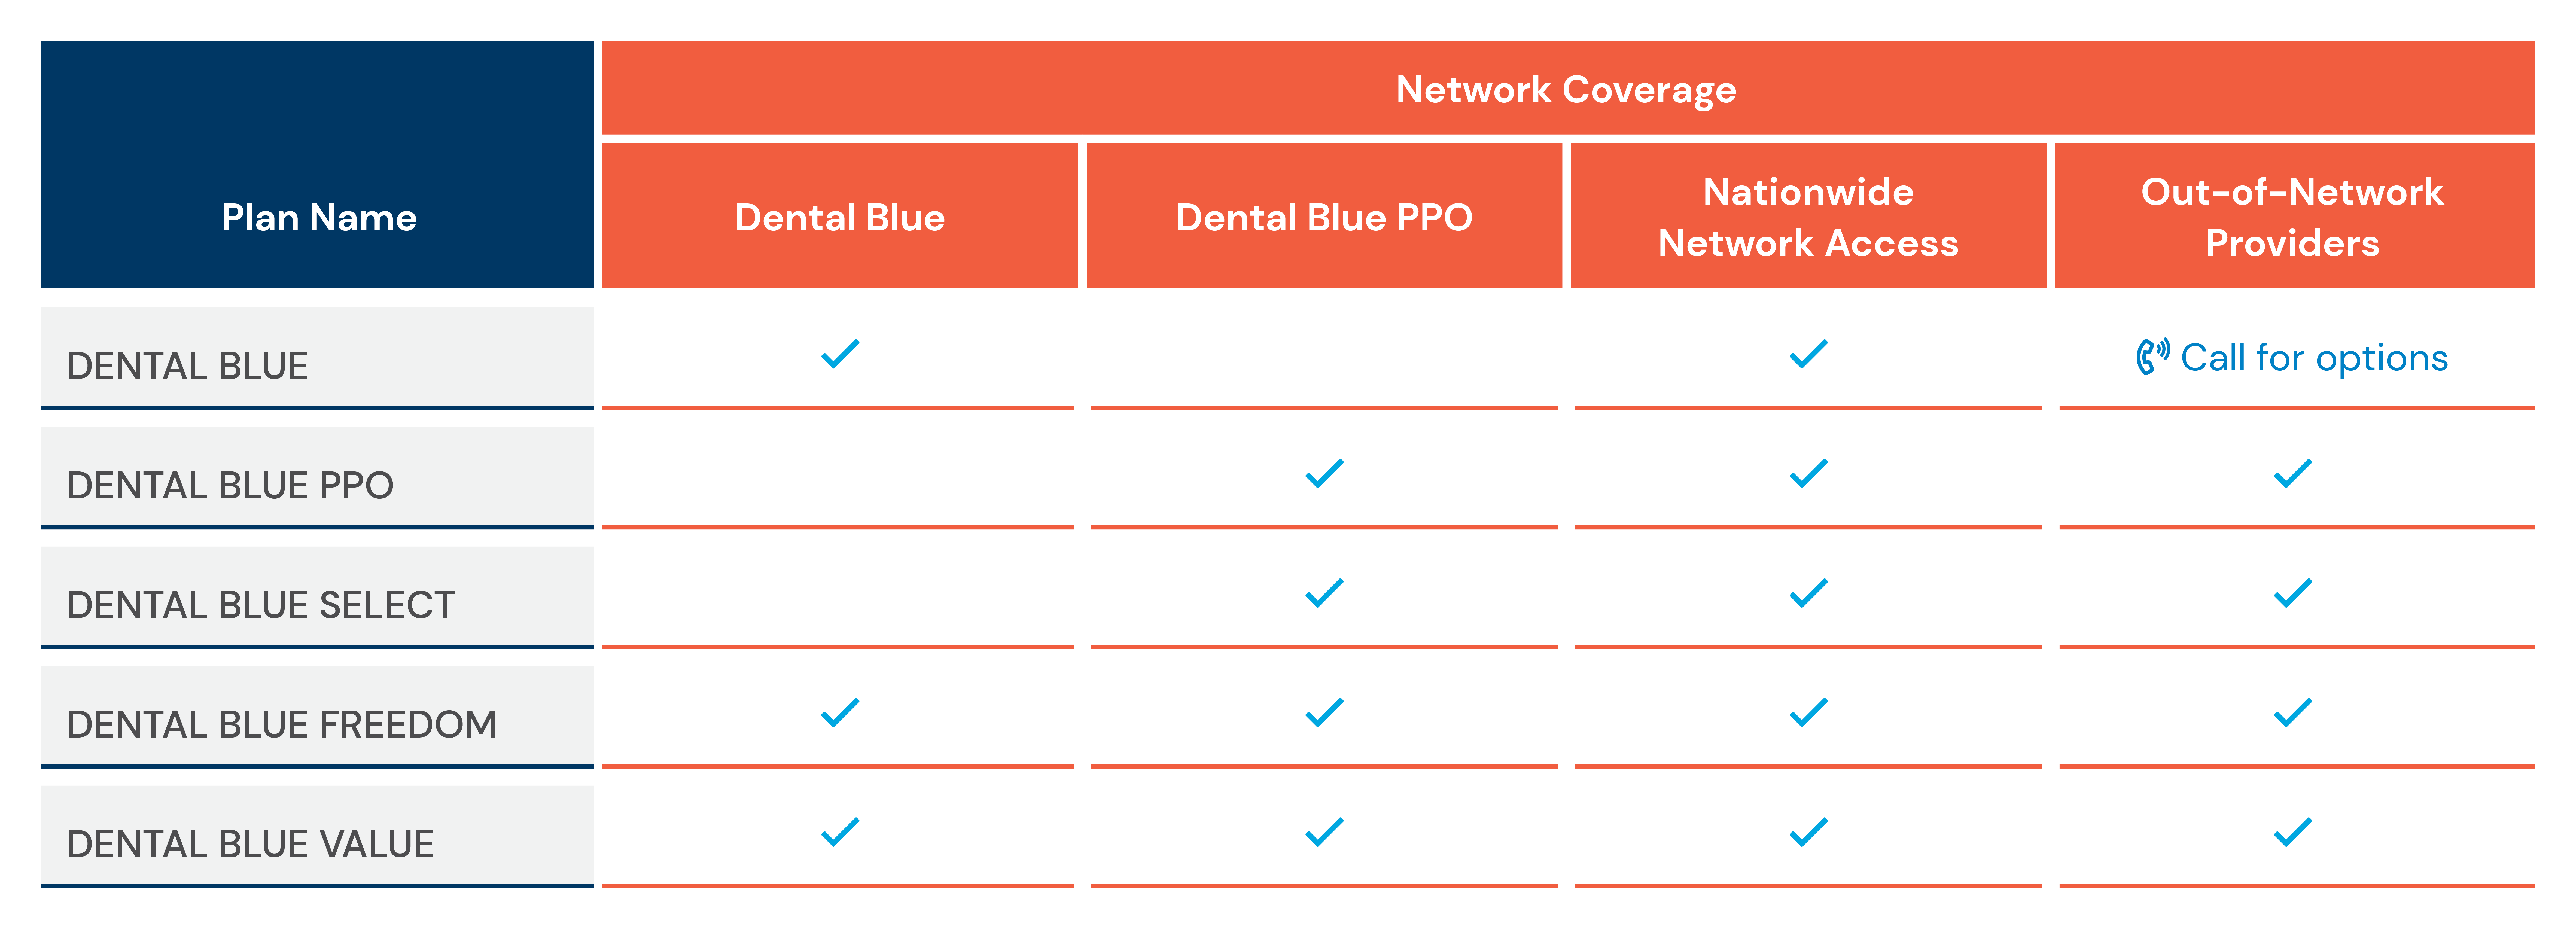 Network Coverage Table